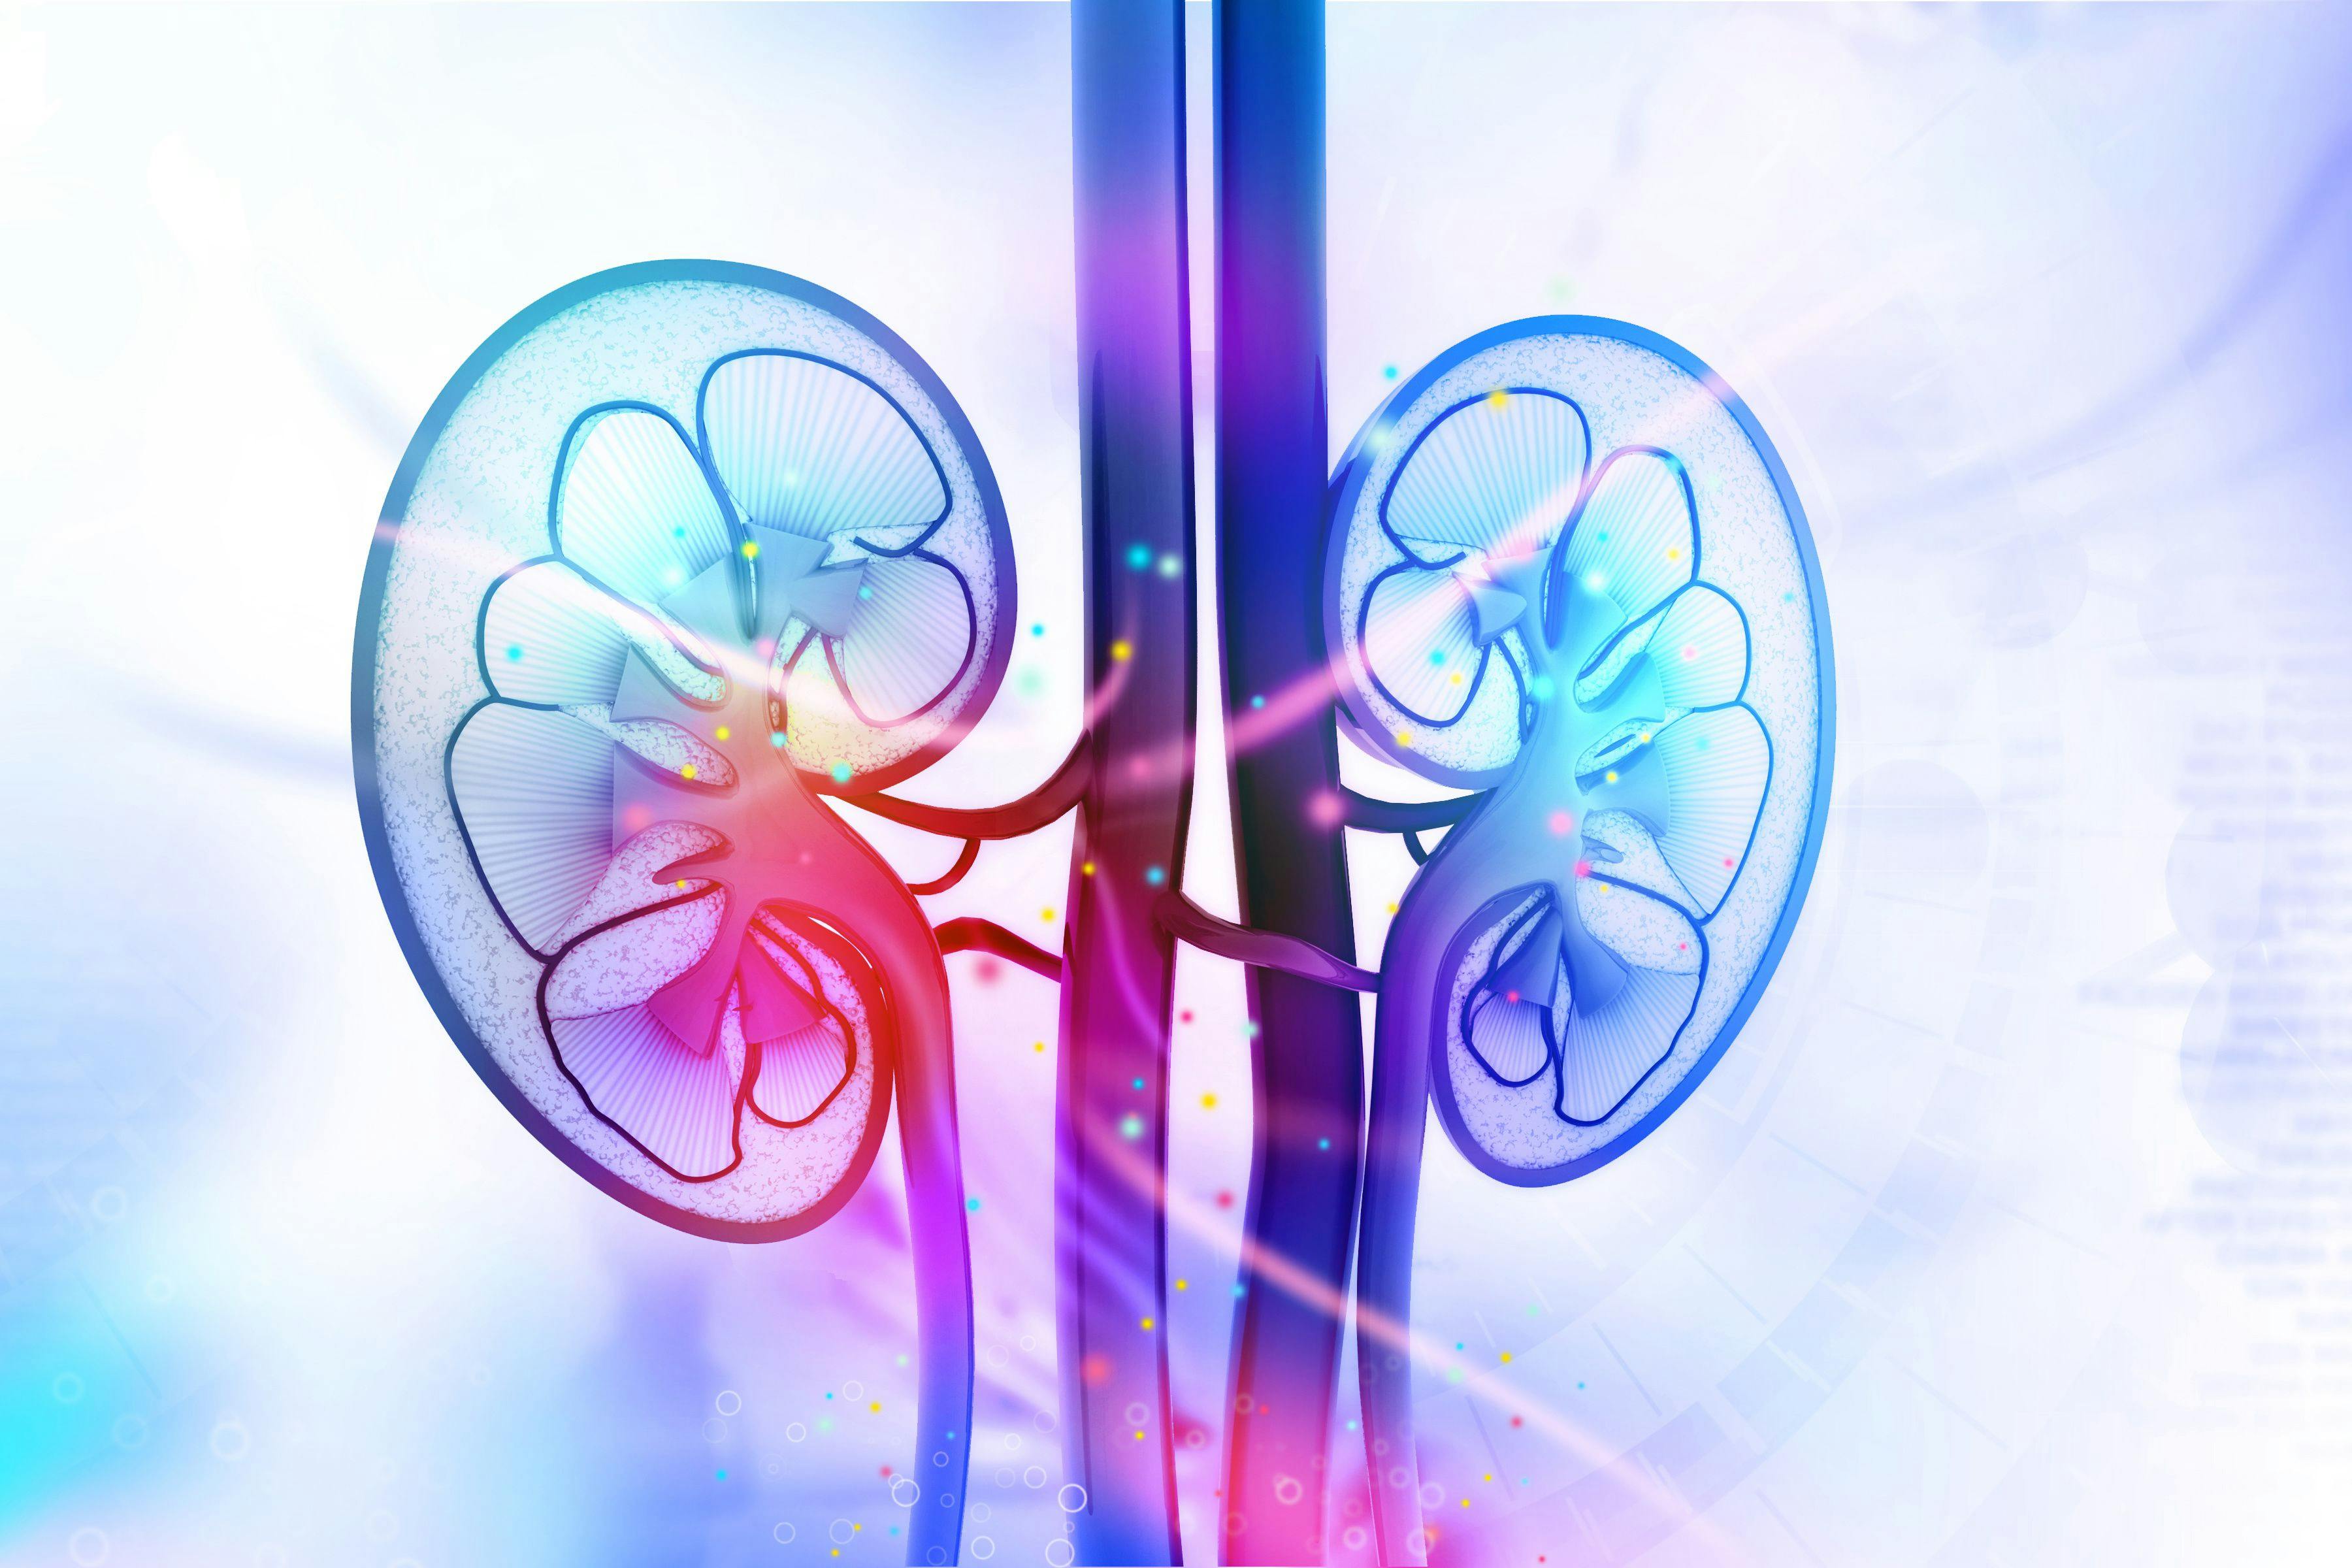 Study Examines Clinical Implications of Removing Race From eGFR in CKD